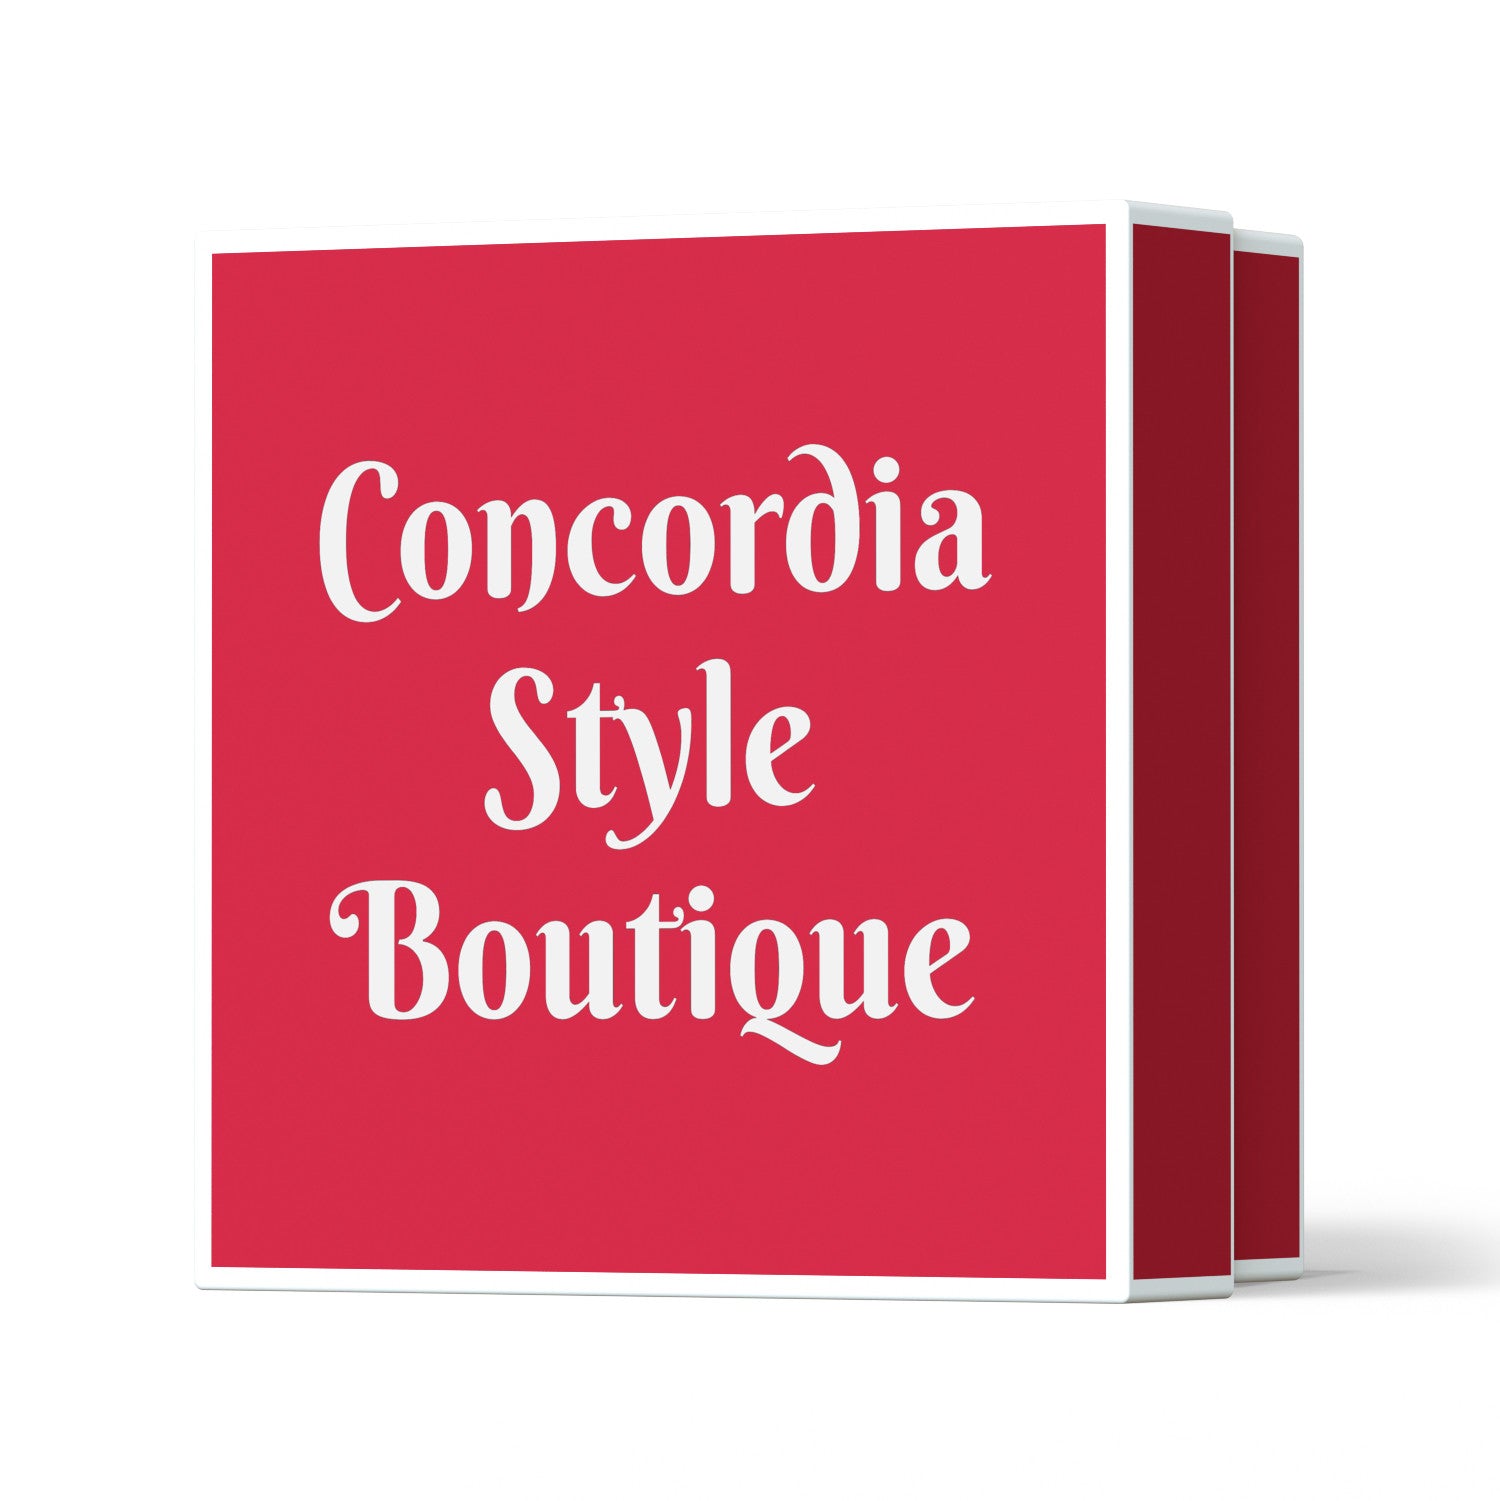 Bold Red - Premium red_whitetrim from Concordia Style Boutique - Just $5! Shop now at Concordia Style Boutique